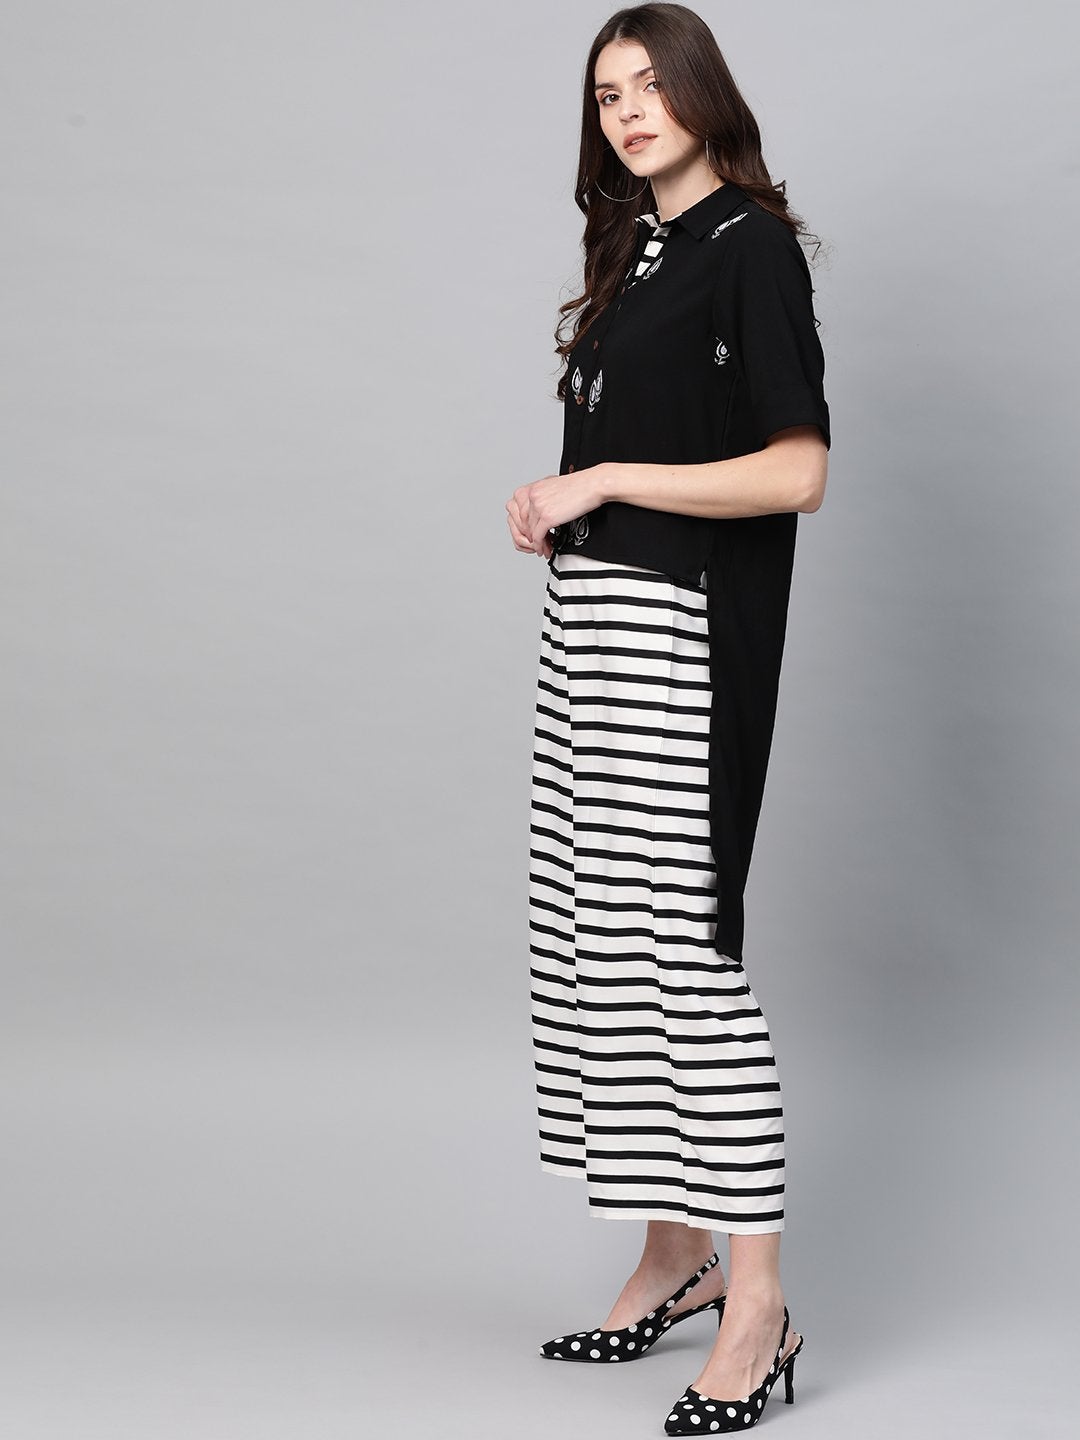 Women's Solid Embroidered Top With Stripe Pants - Pannkh